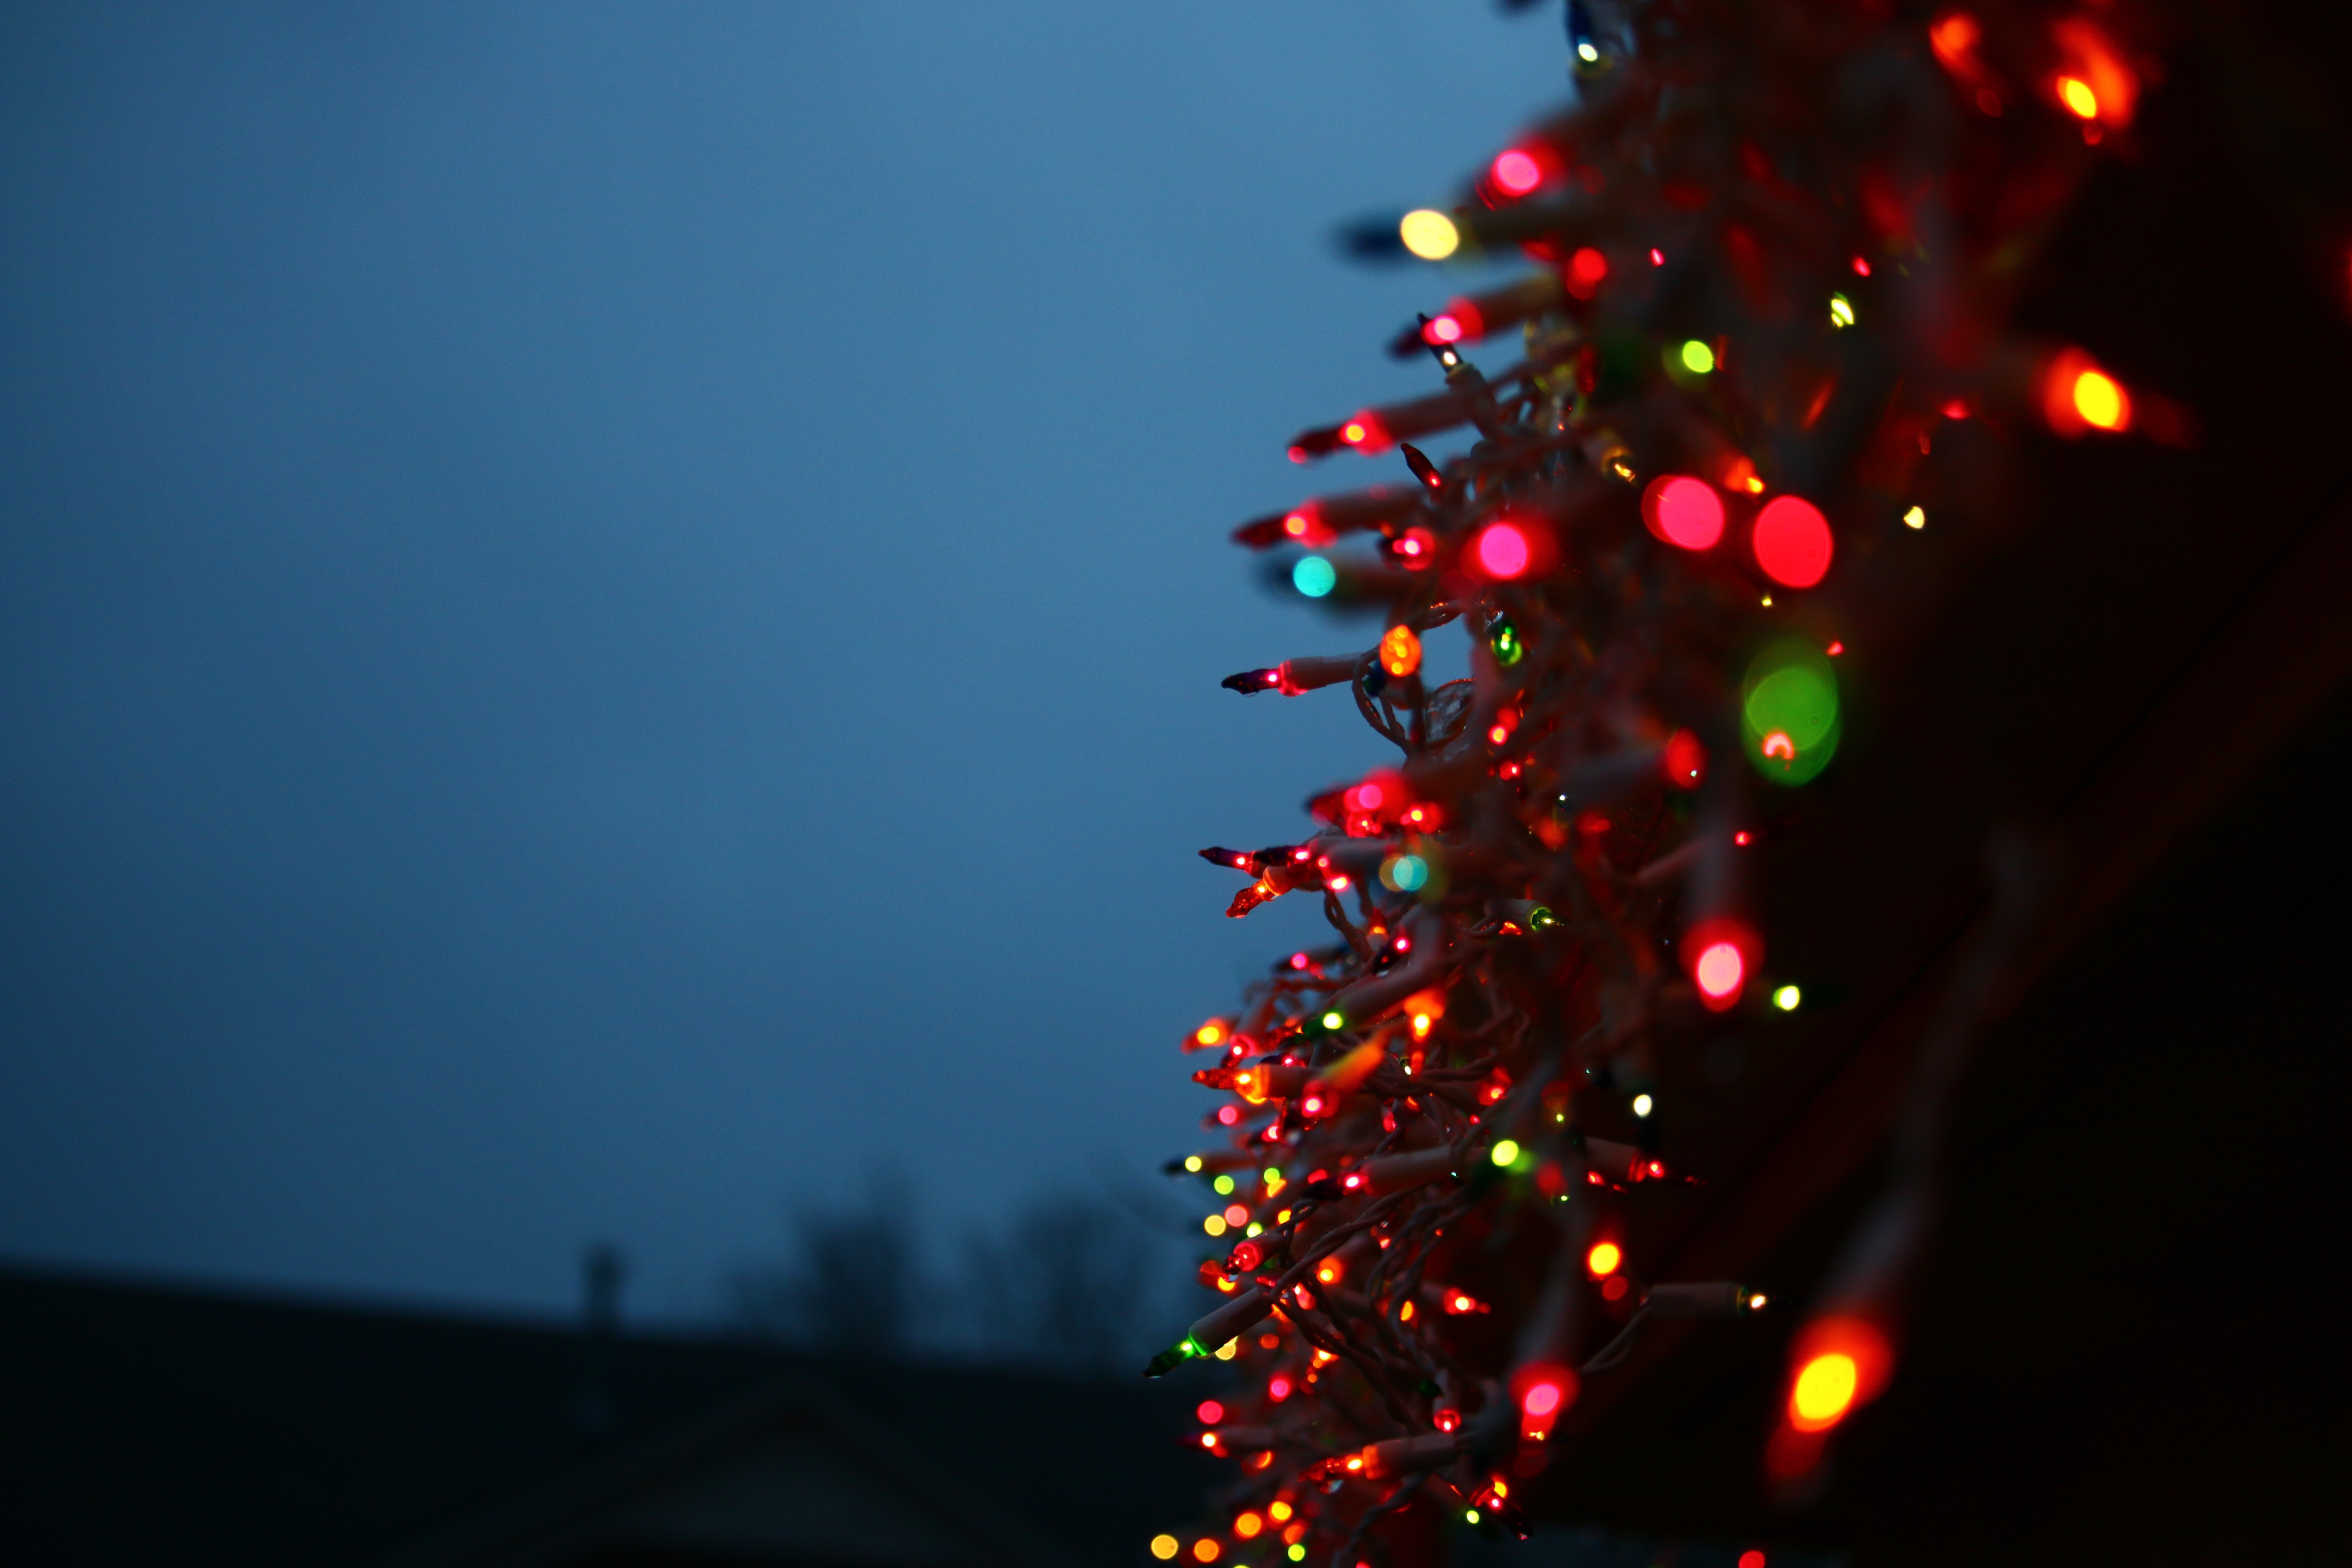 General 5472x3648 Christmas lights LEDs outdoors blurred